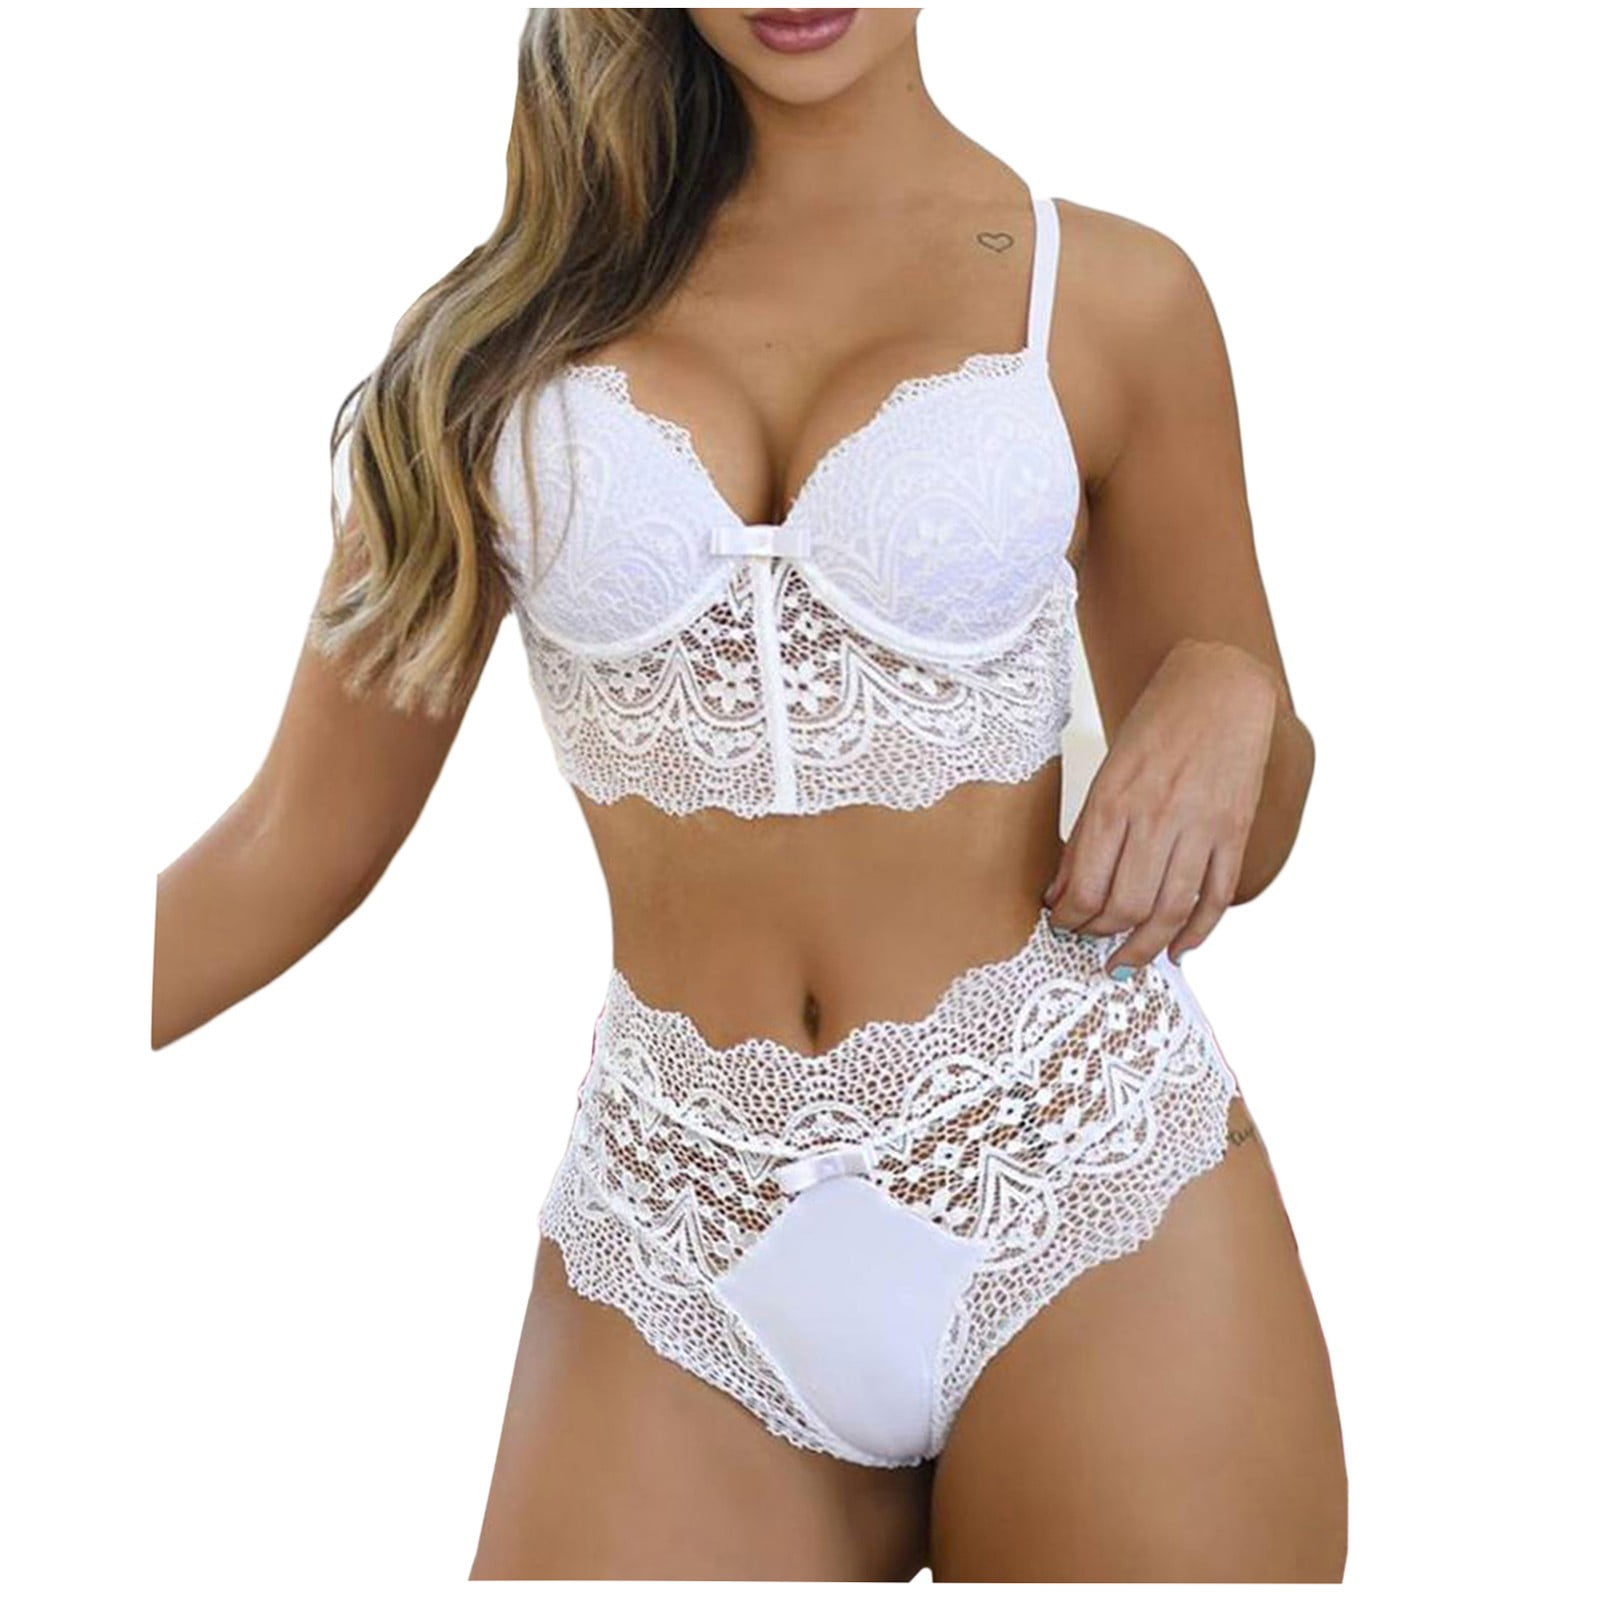 Push up Bra Sexy Lingerie for Women Women Sexy Lace Wireless Bowknot Bra  Thong Lingerie Underwear Pajamas Set M-3XL Crotchless Lingerie for Women  Womens Sports Bras White,3XL 